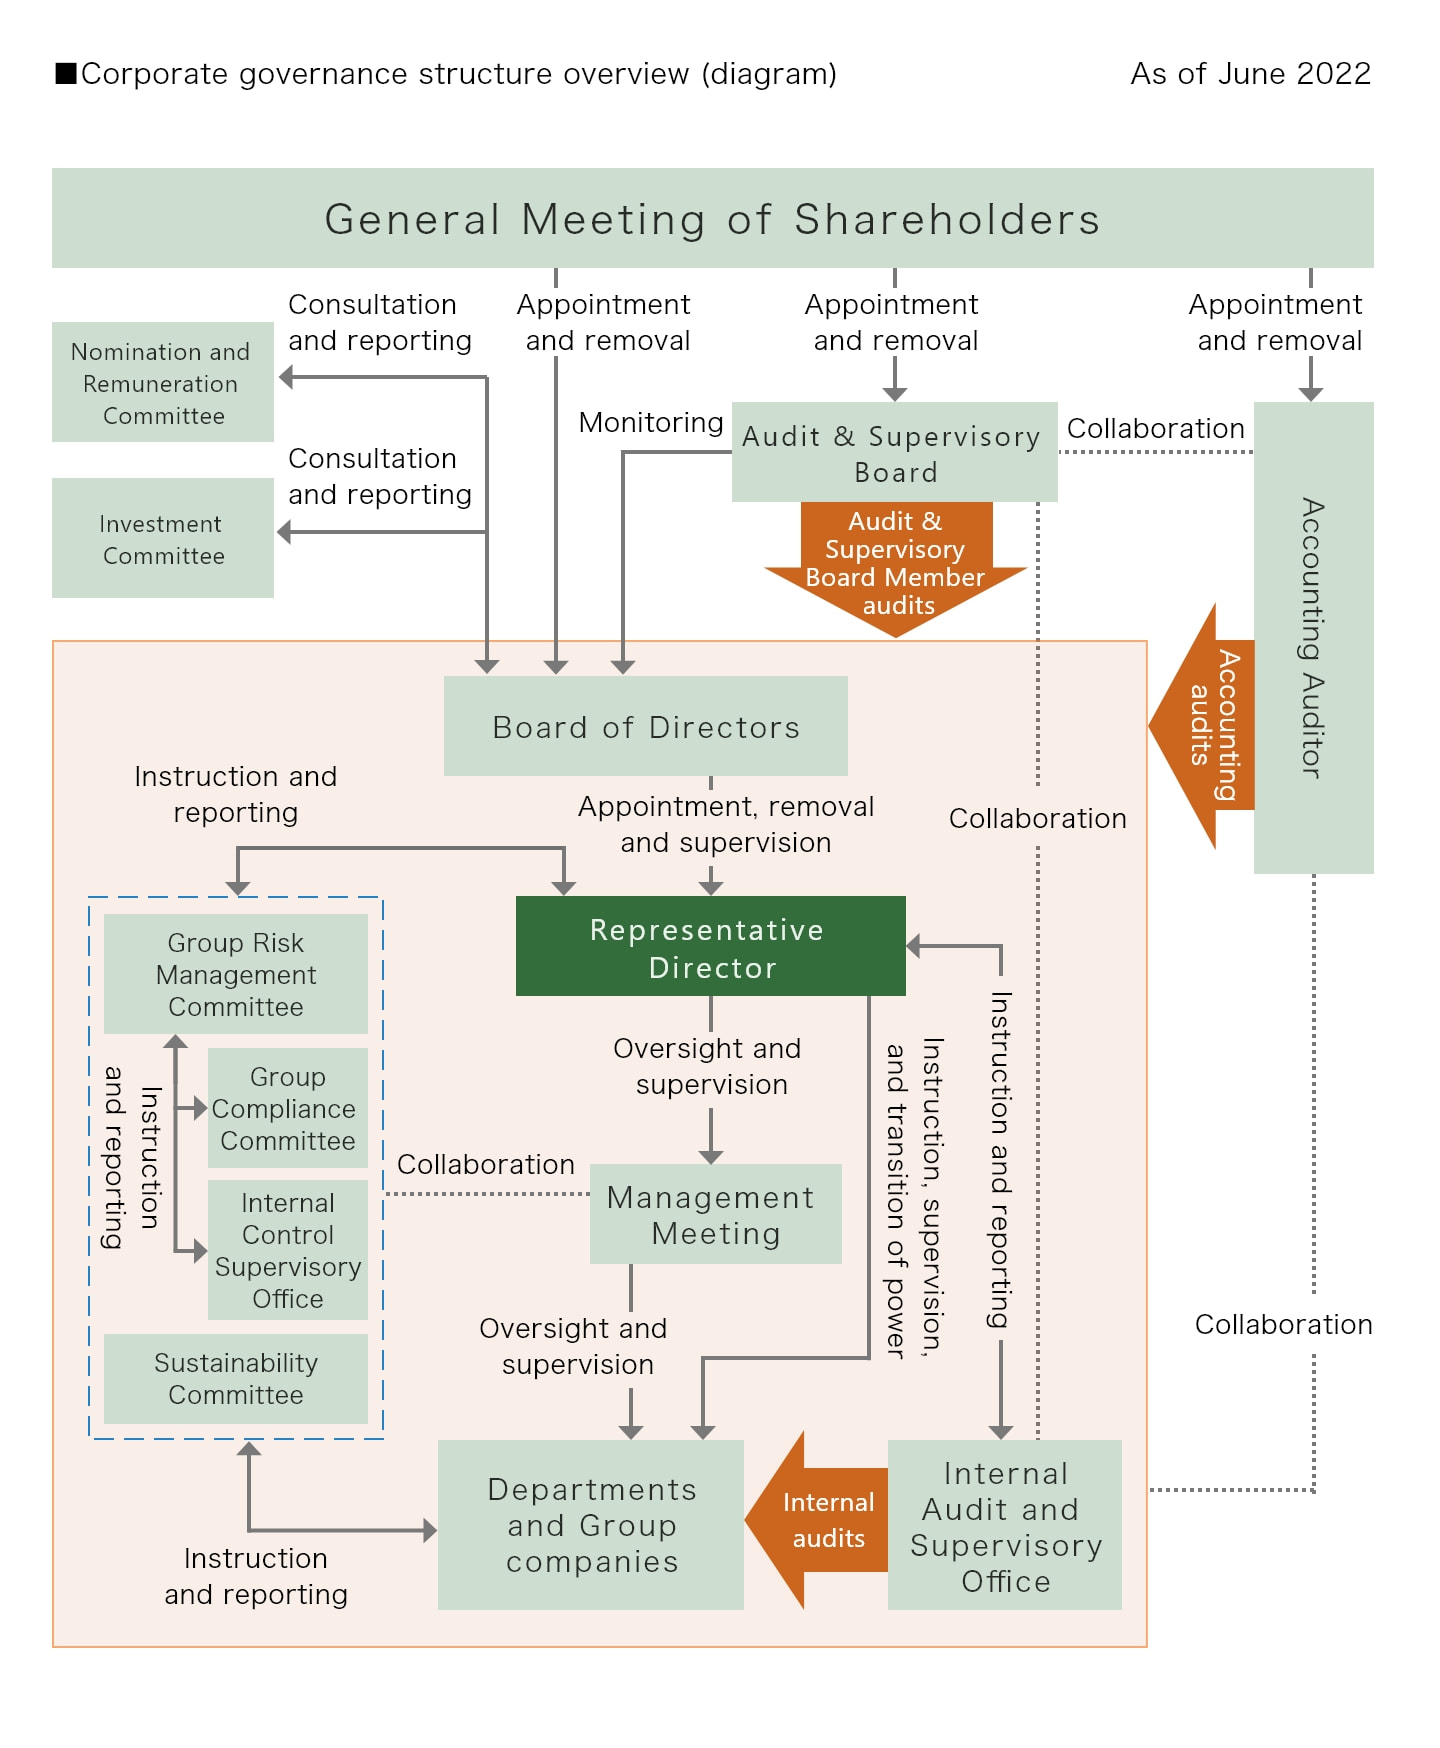 Corporate governance structure overview (diagram)